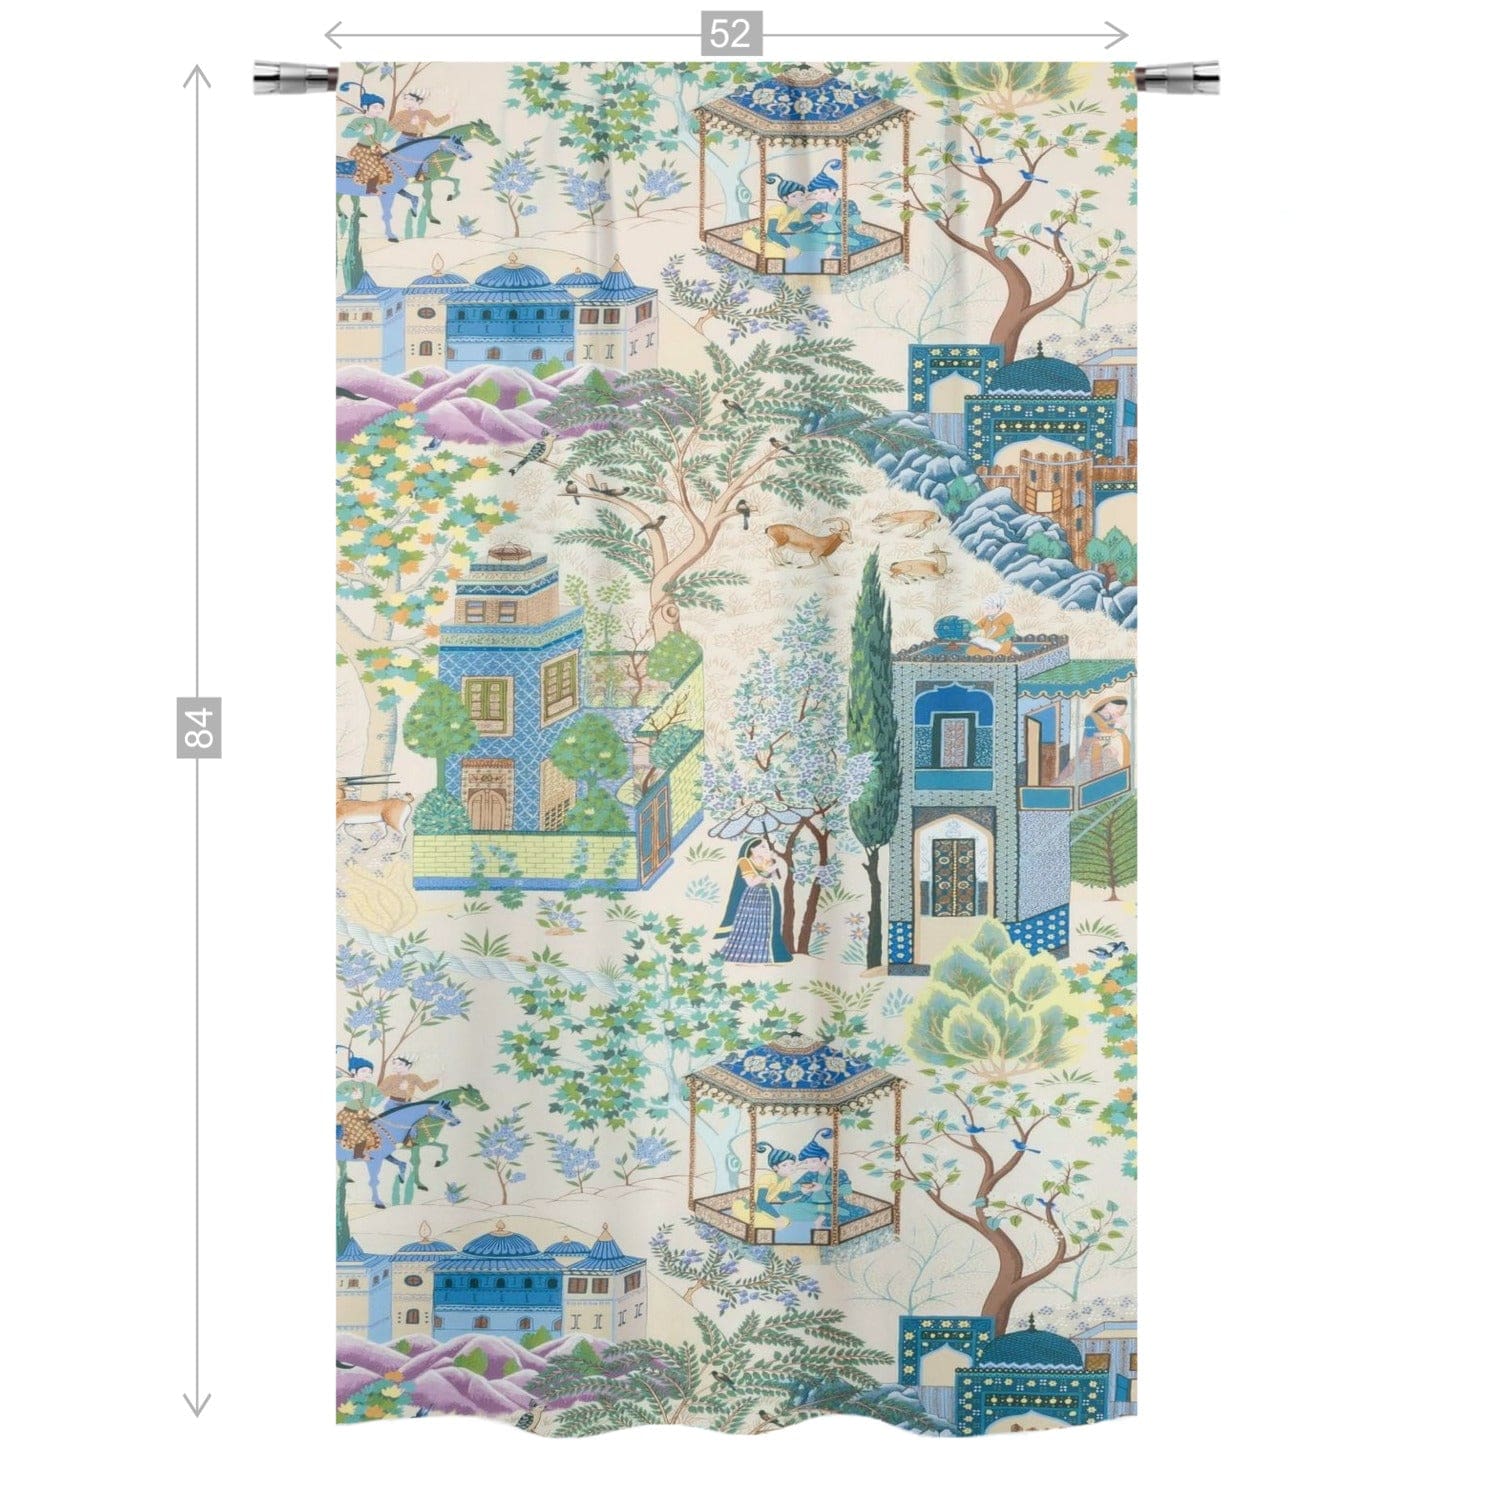 kate-mcenroe-nyc Vintage French Toile De Jouy Opaque Window Curtains, Blue, Green Floral Print, Traditional Asian Country Scene, Rustic Chic Window Coverings Curtains